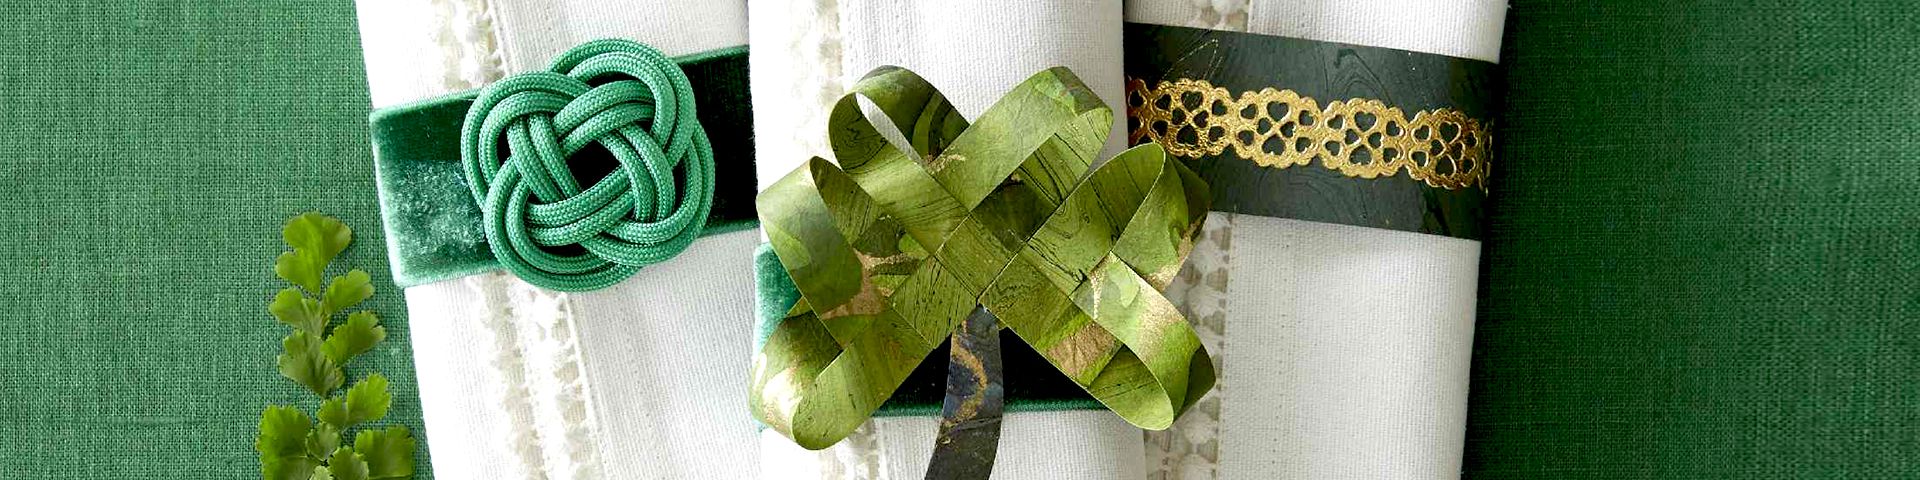 St. Patrick's Day festive napkin holders on a green tablecloth